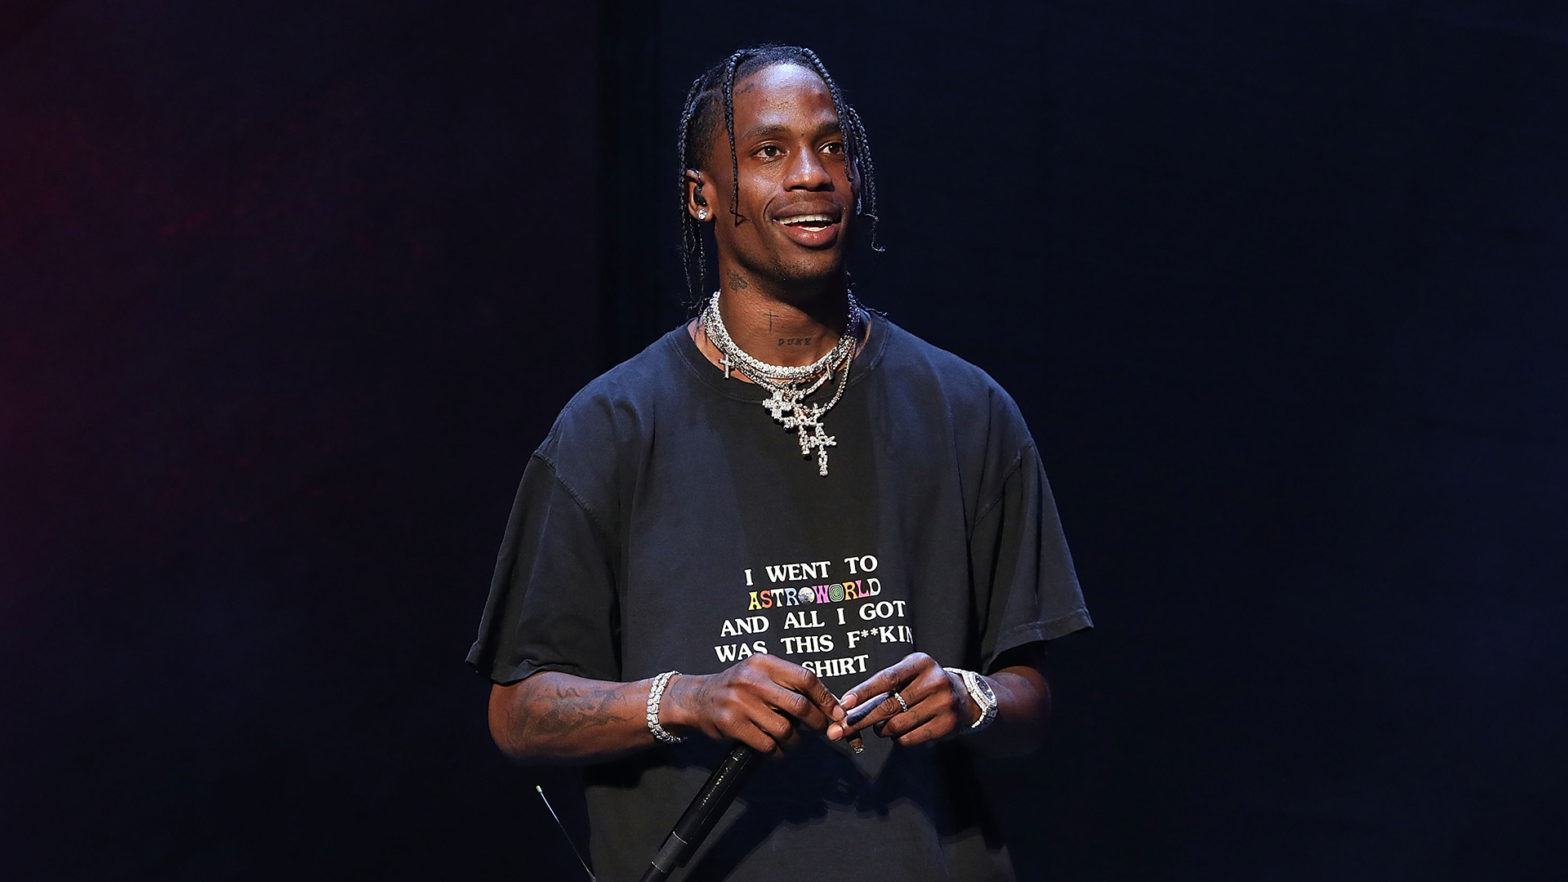 Travis Scott's Latest Nike Drop Proceeds To Go Toward Project Heal, An Initiative Geared Toward Mental Health Resources And More